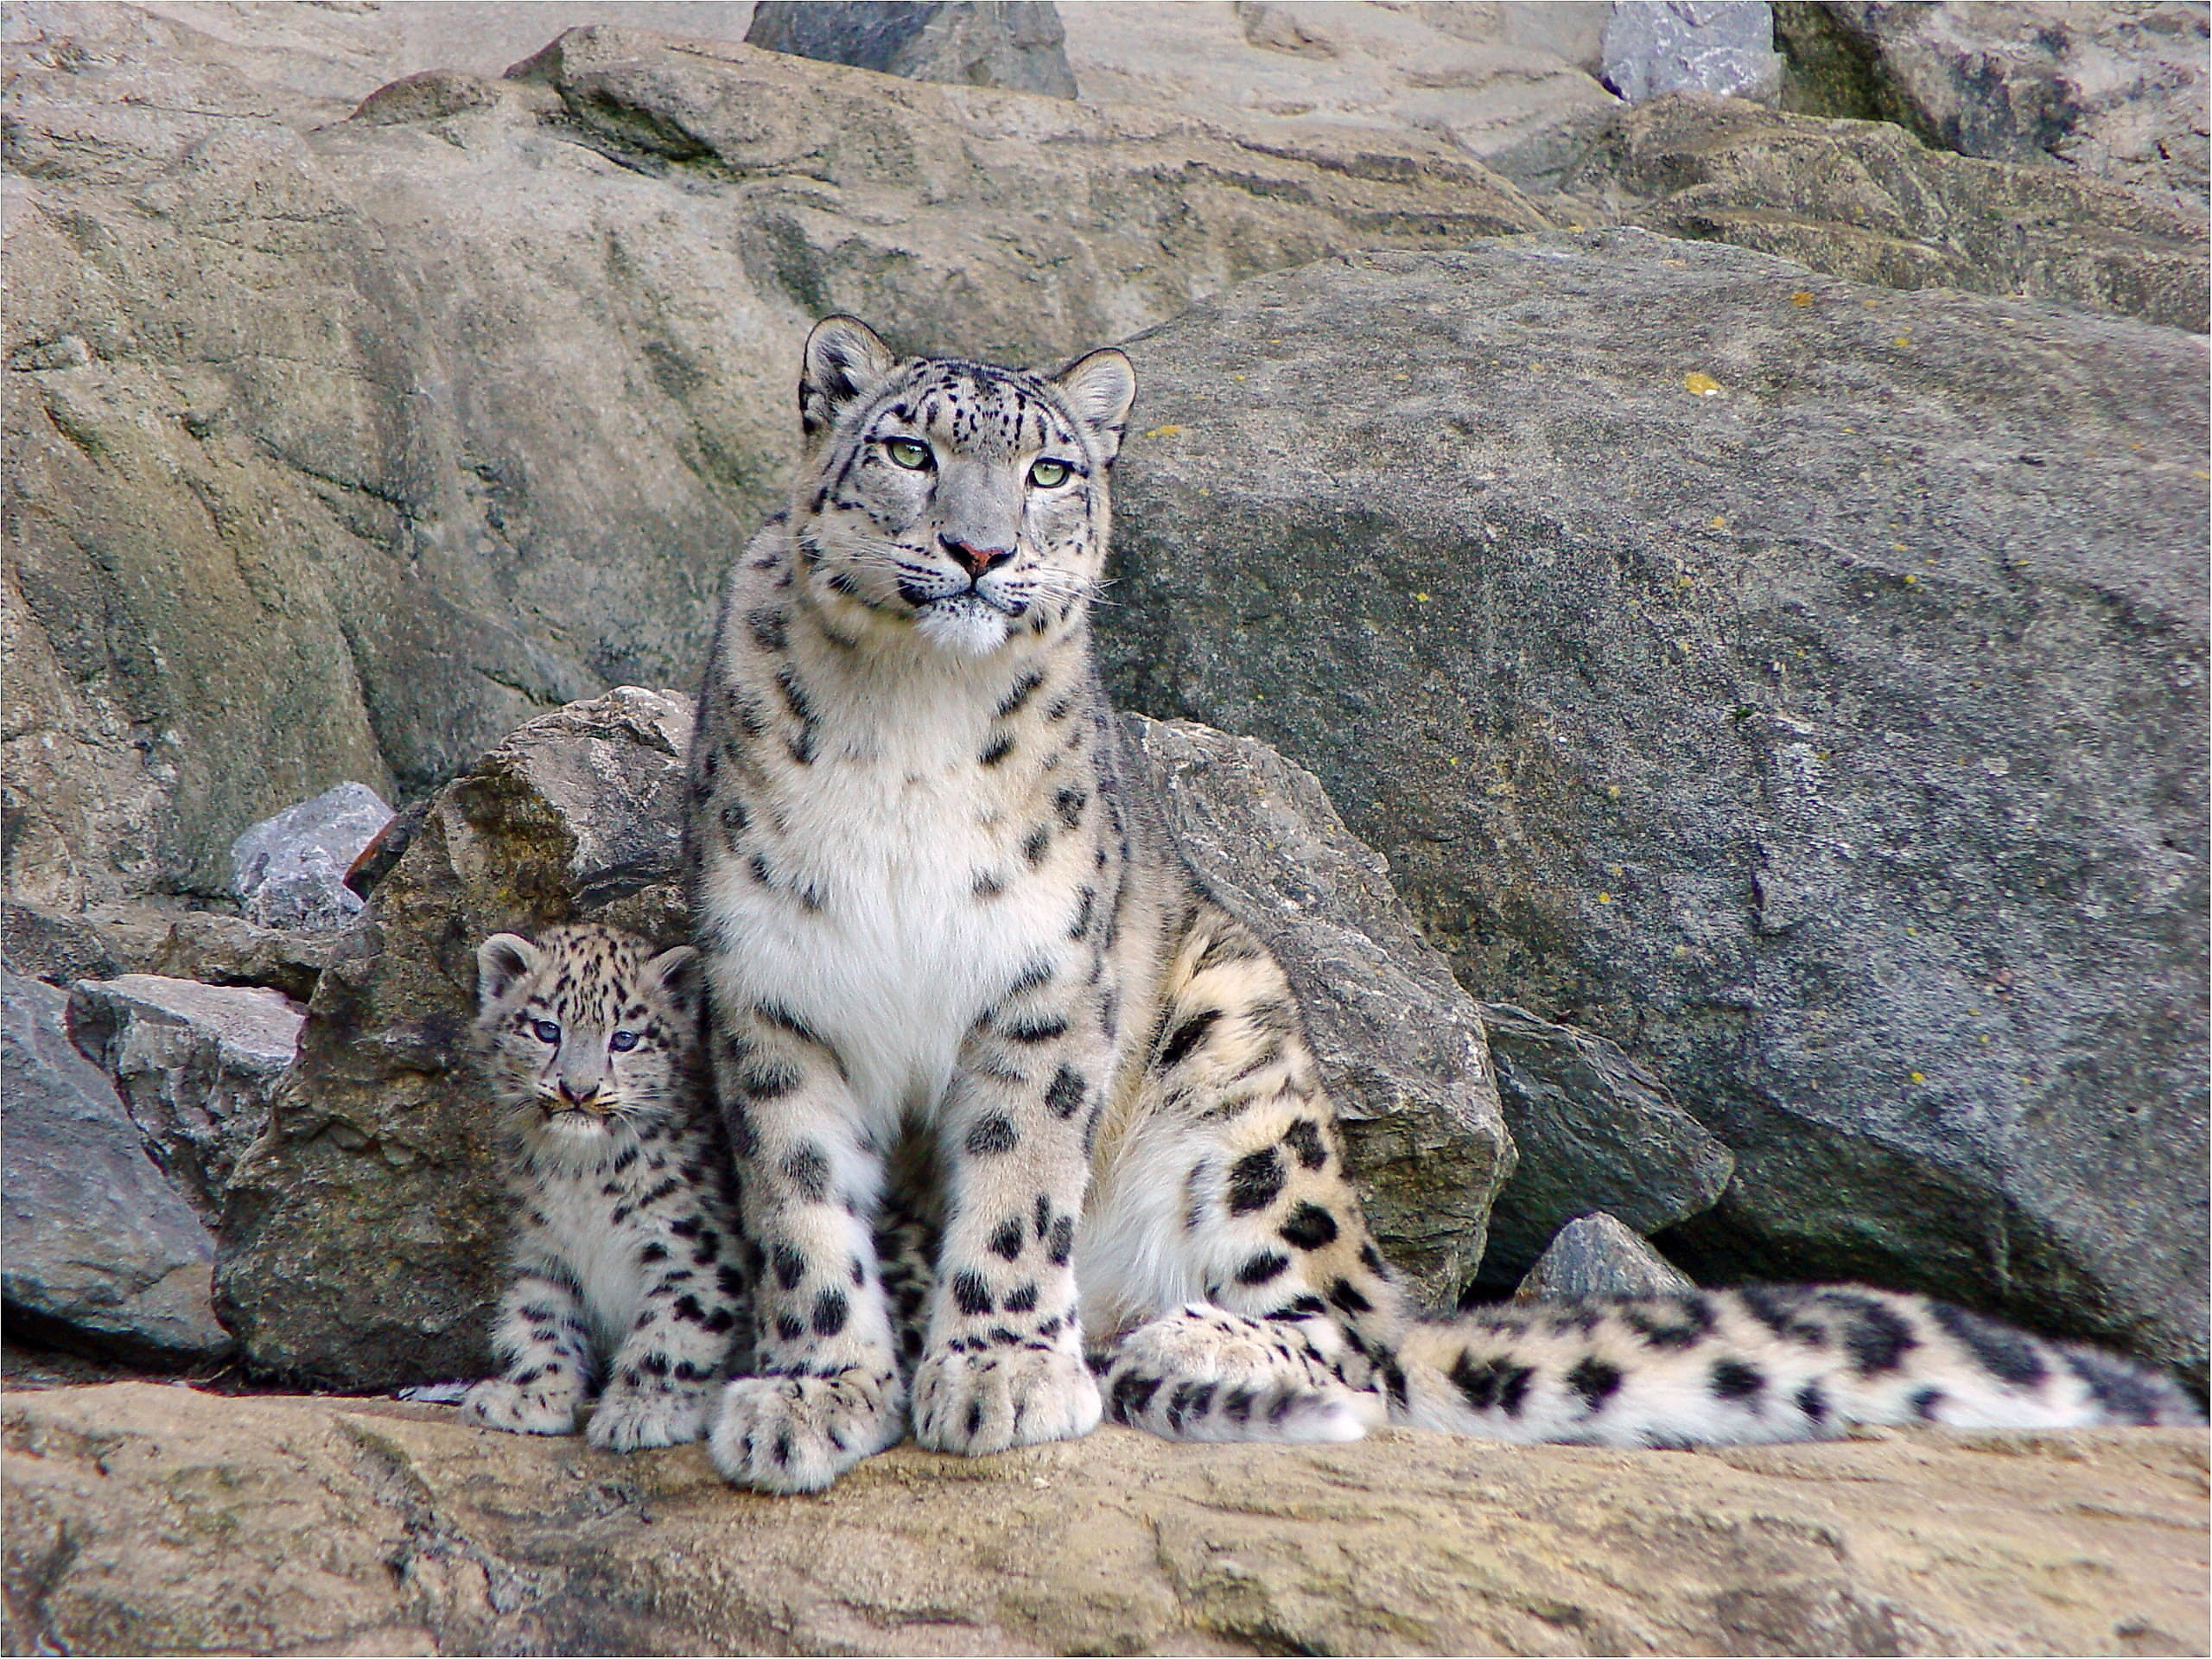 Popular Snow Leopards Image for Phone